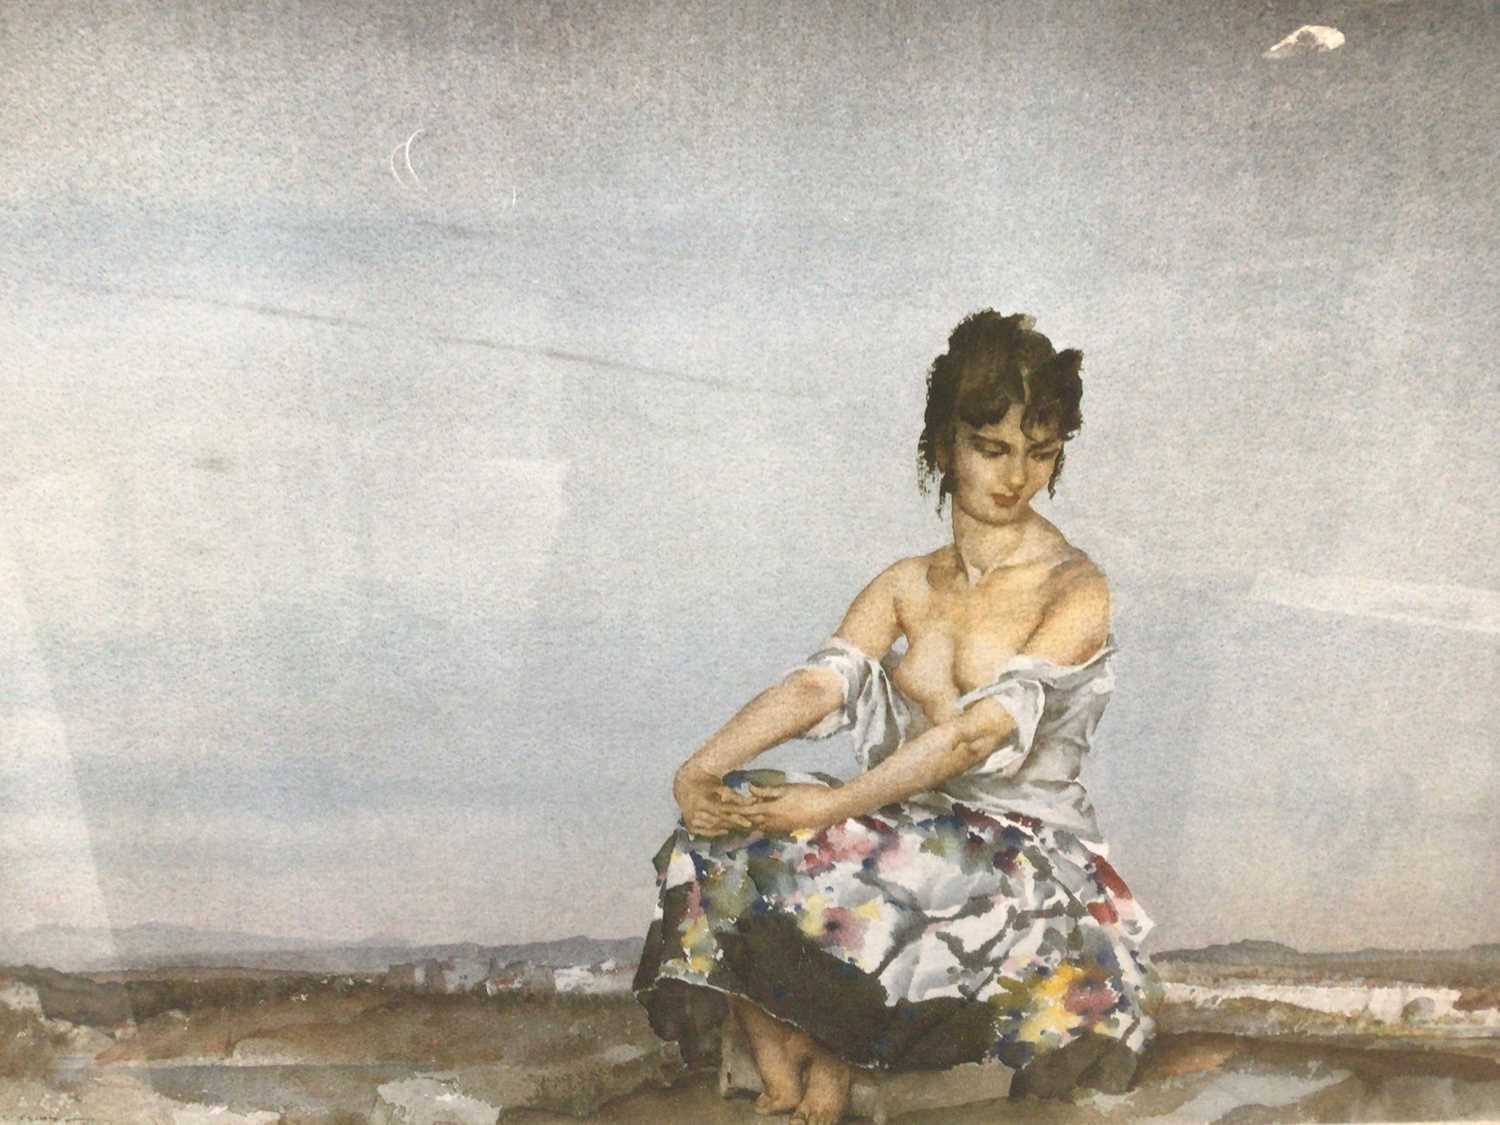 Lot 270 - William Russell Flint (1880-1969) limited edition colour print - seated female figure in landscape, 207/850, with WRF Galleries blindstamp, 46cm x 63cm, in glazed frame